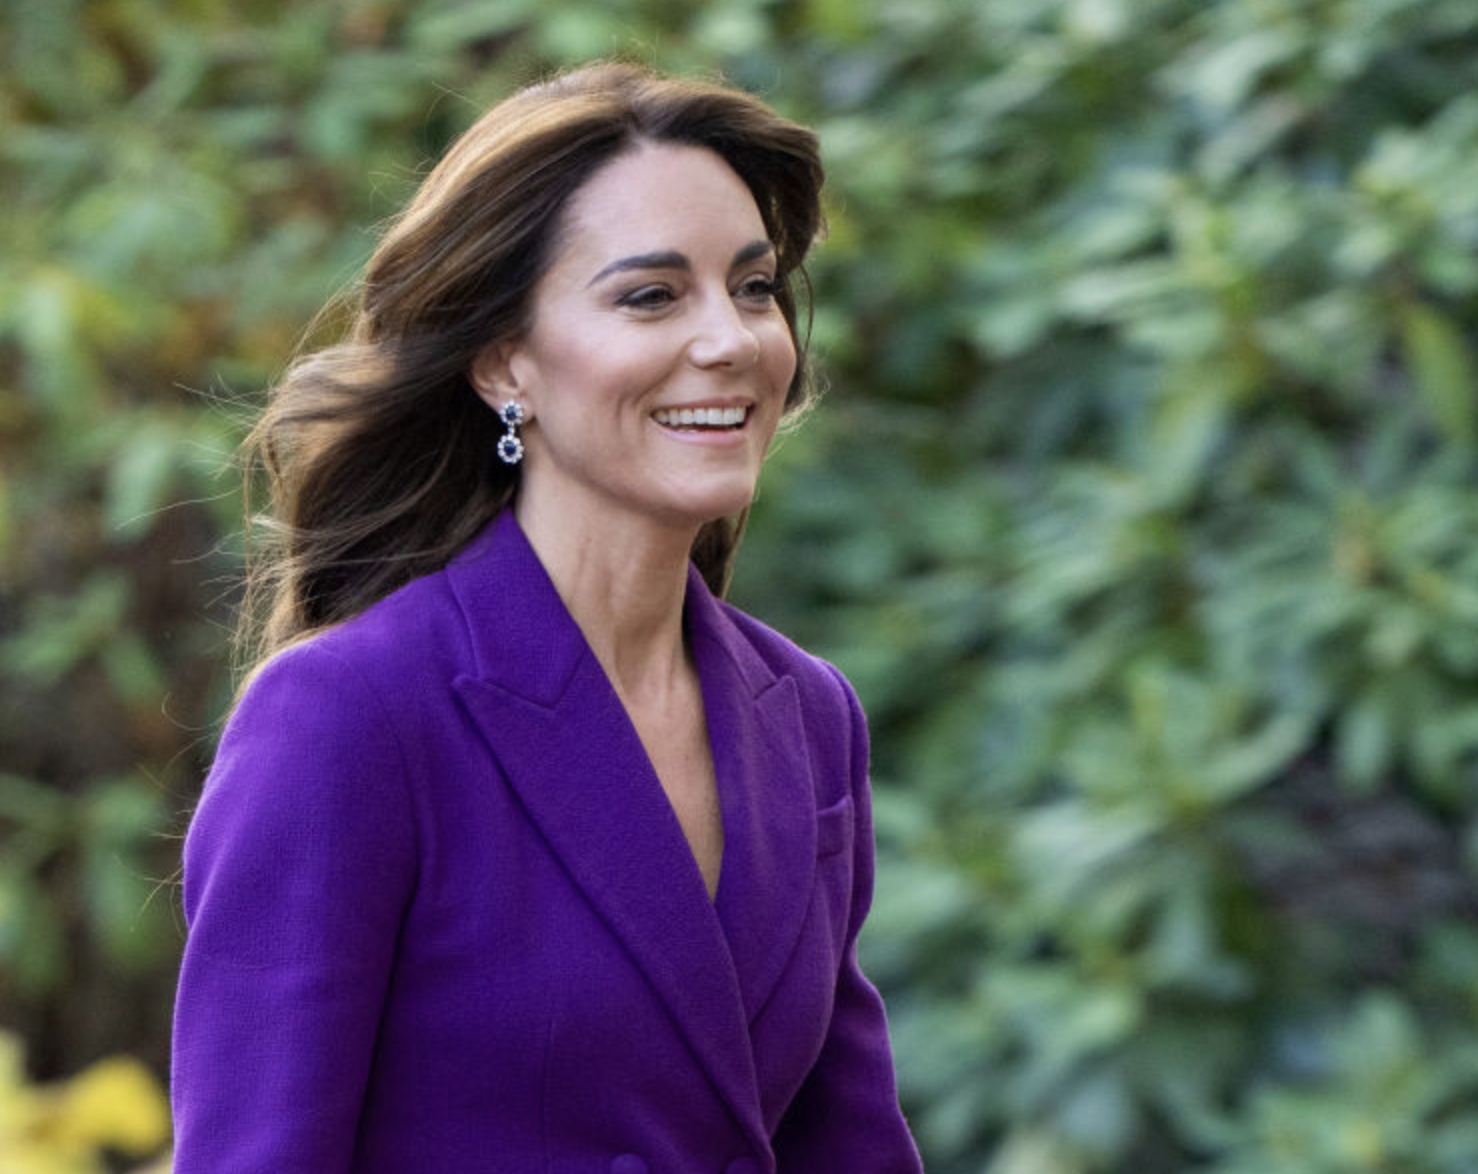 Kate Middleton Sighting: Royal In Previously Unseen Photo